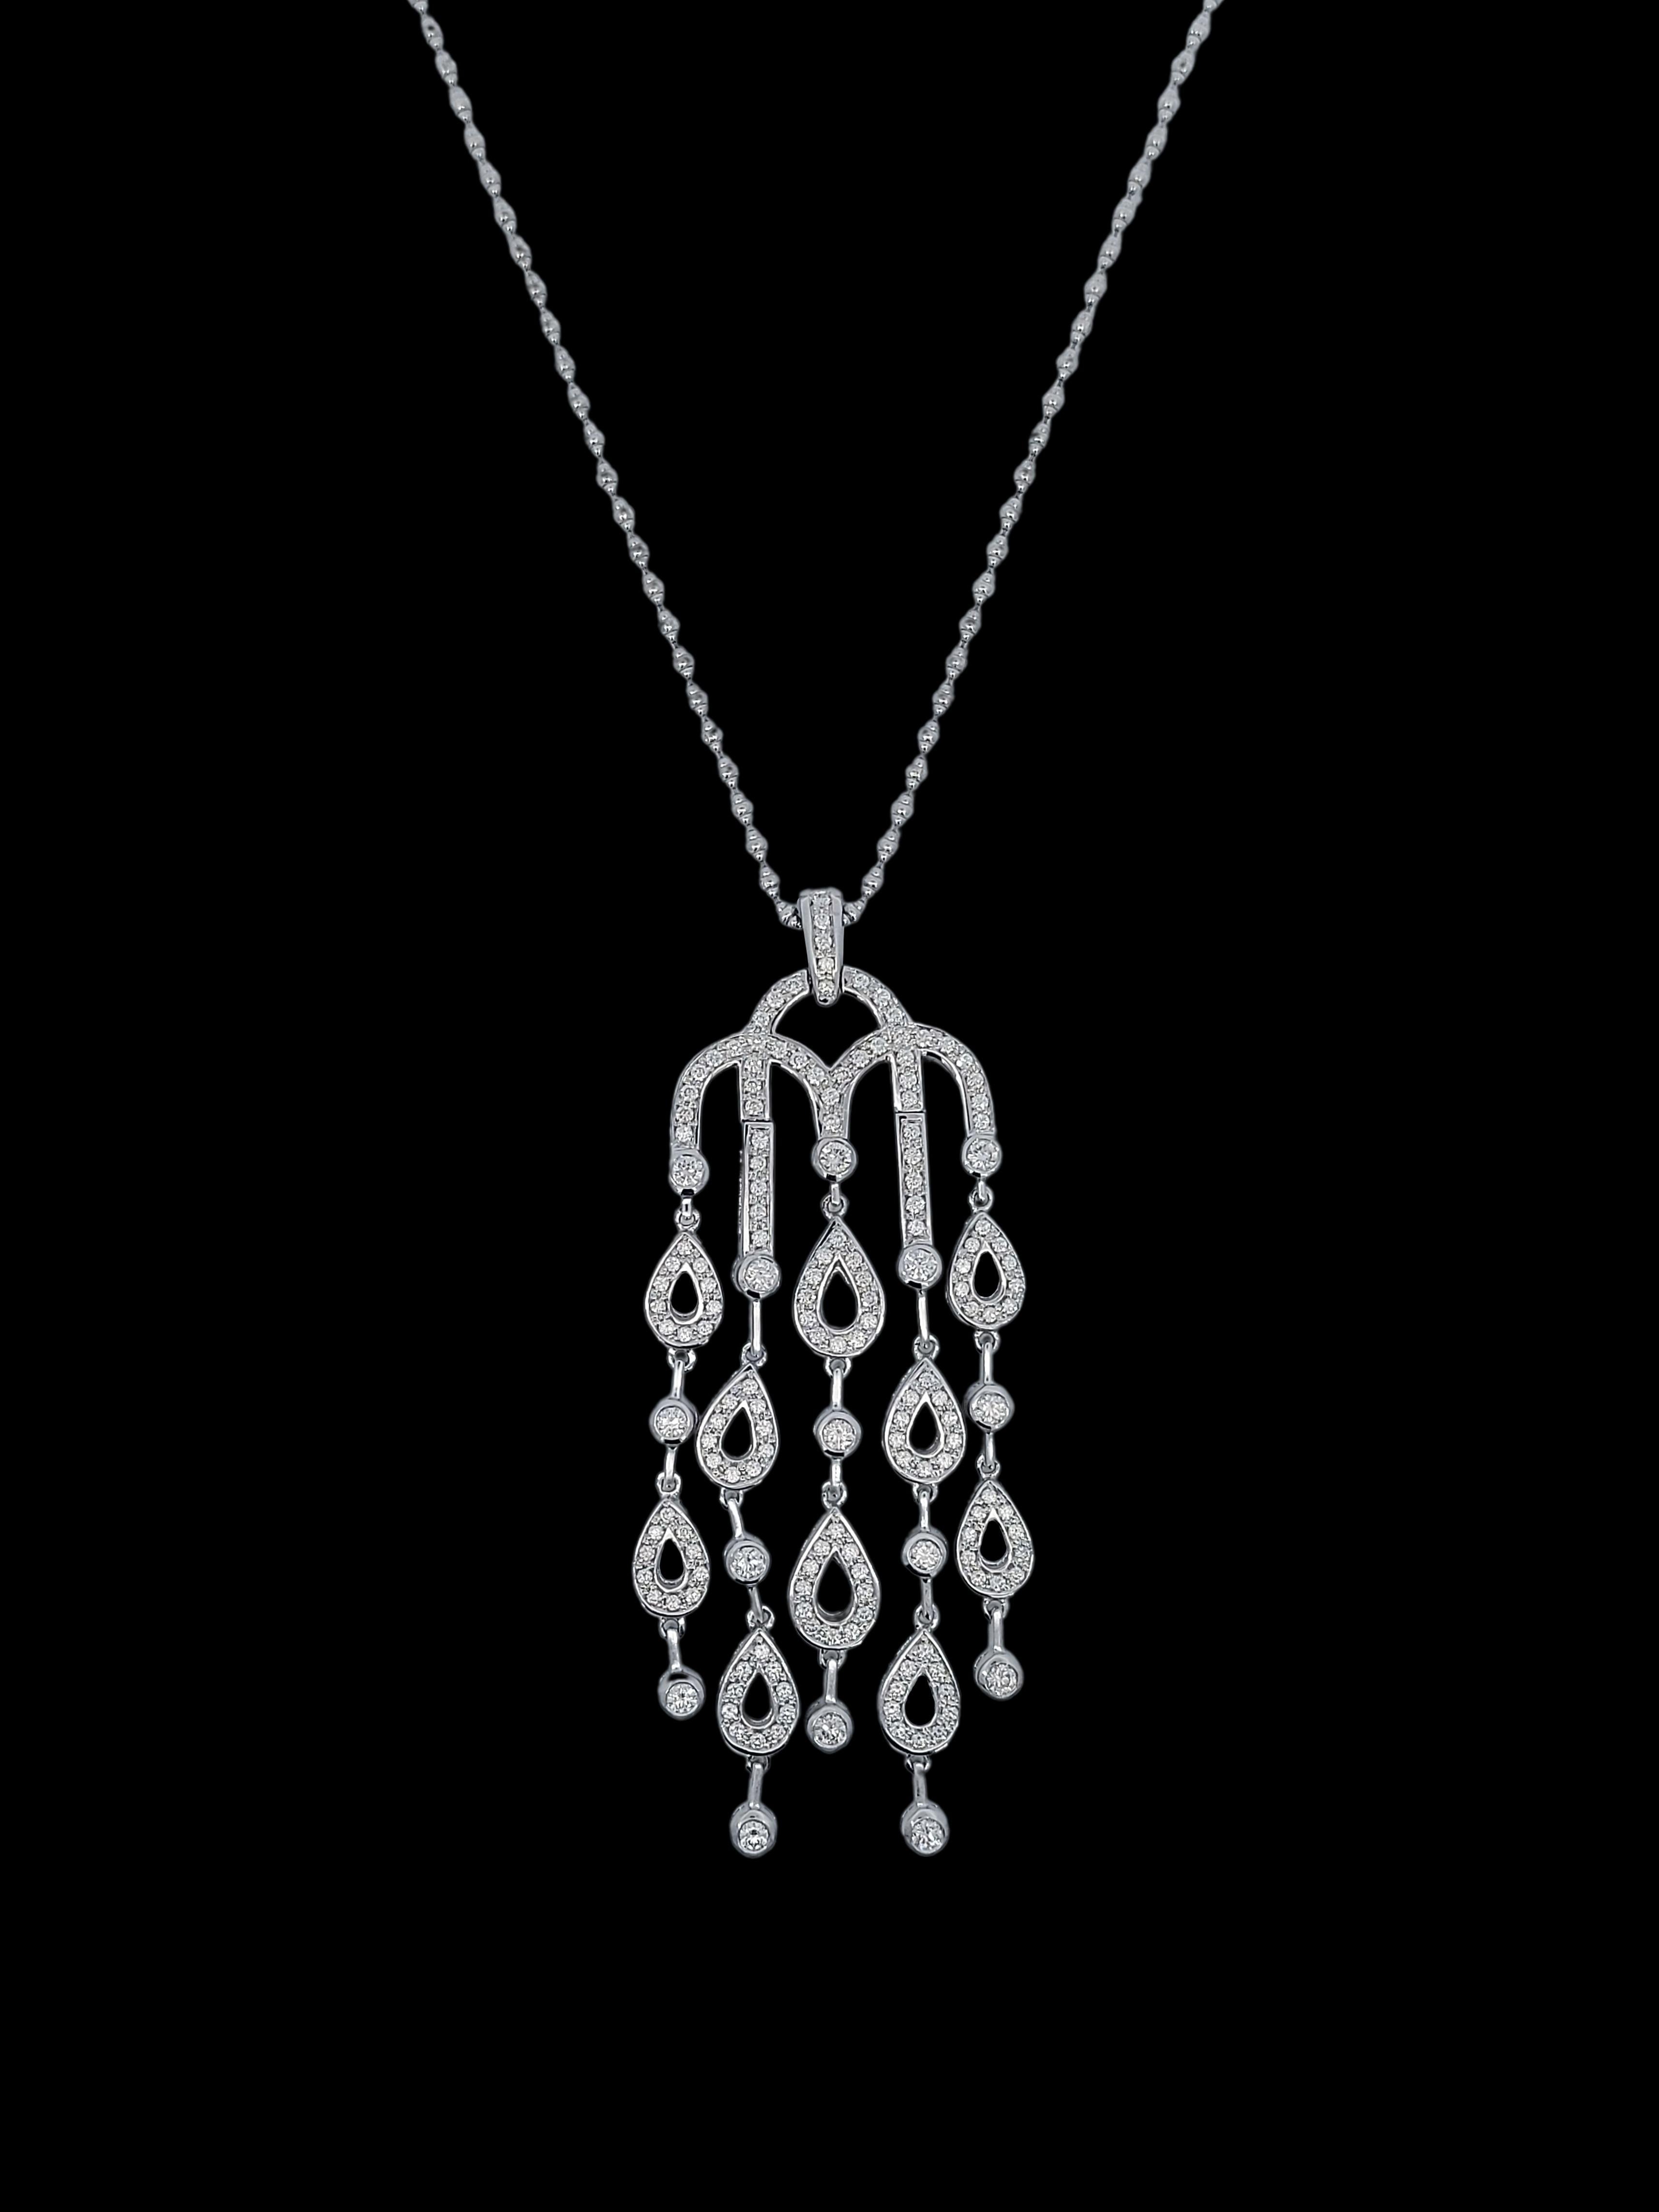 Dangling Chandelier 18kt White Gold Necklace with 5.4ct Diamonds For Sale 1